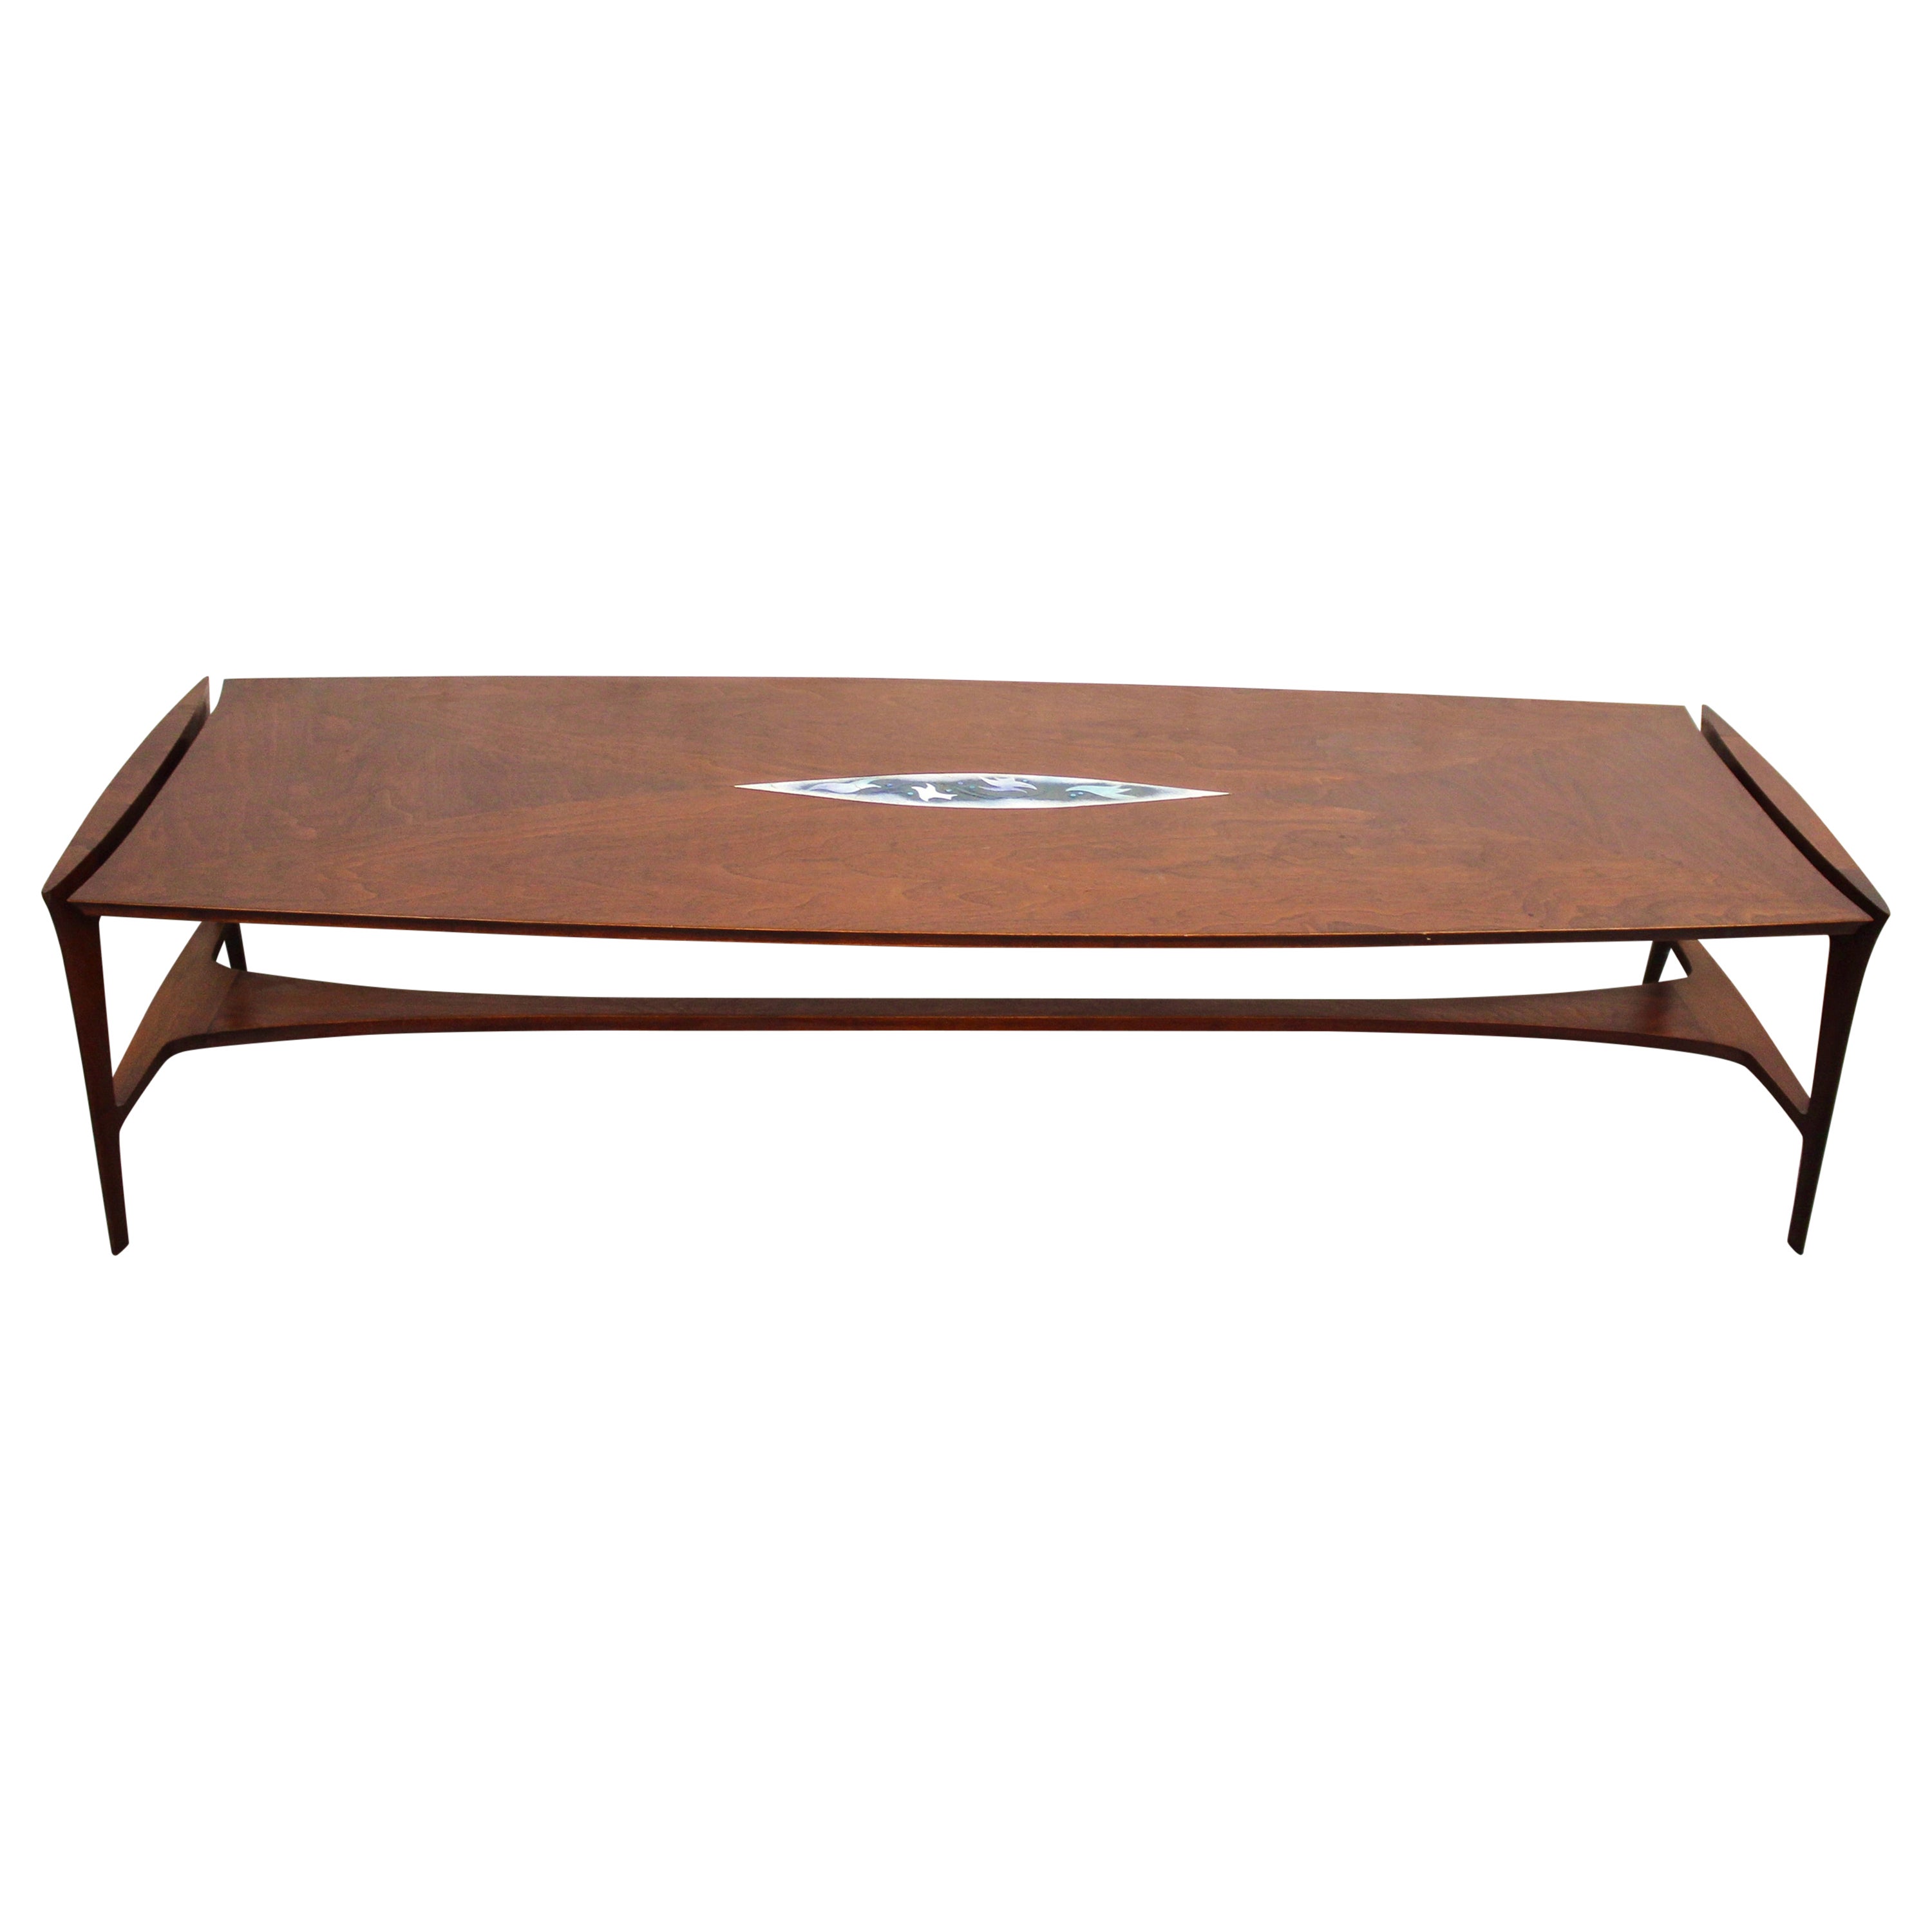 Mid-Century Ceramic Inlaid Coffee Table by John Stuart For Sale